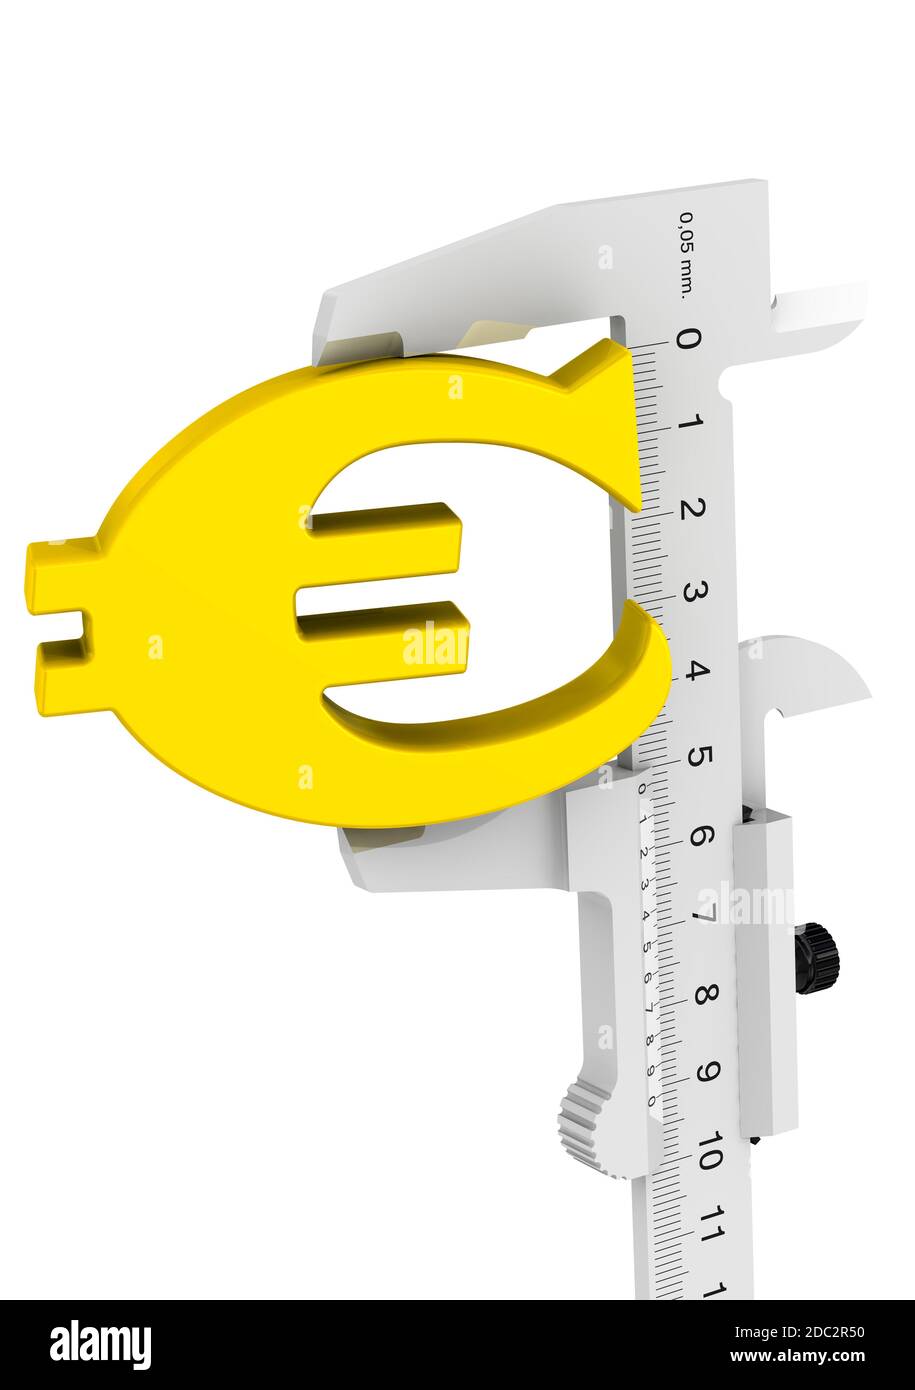 Caliper measures the golden symbol of the European currency - euro. Financial concept. Isolated. 3D Illustration Stock Photo